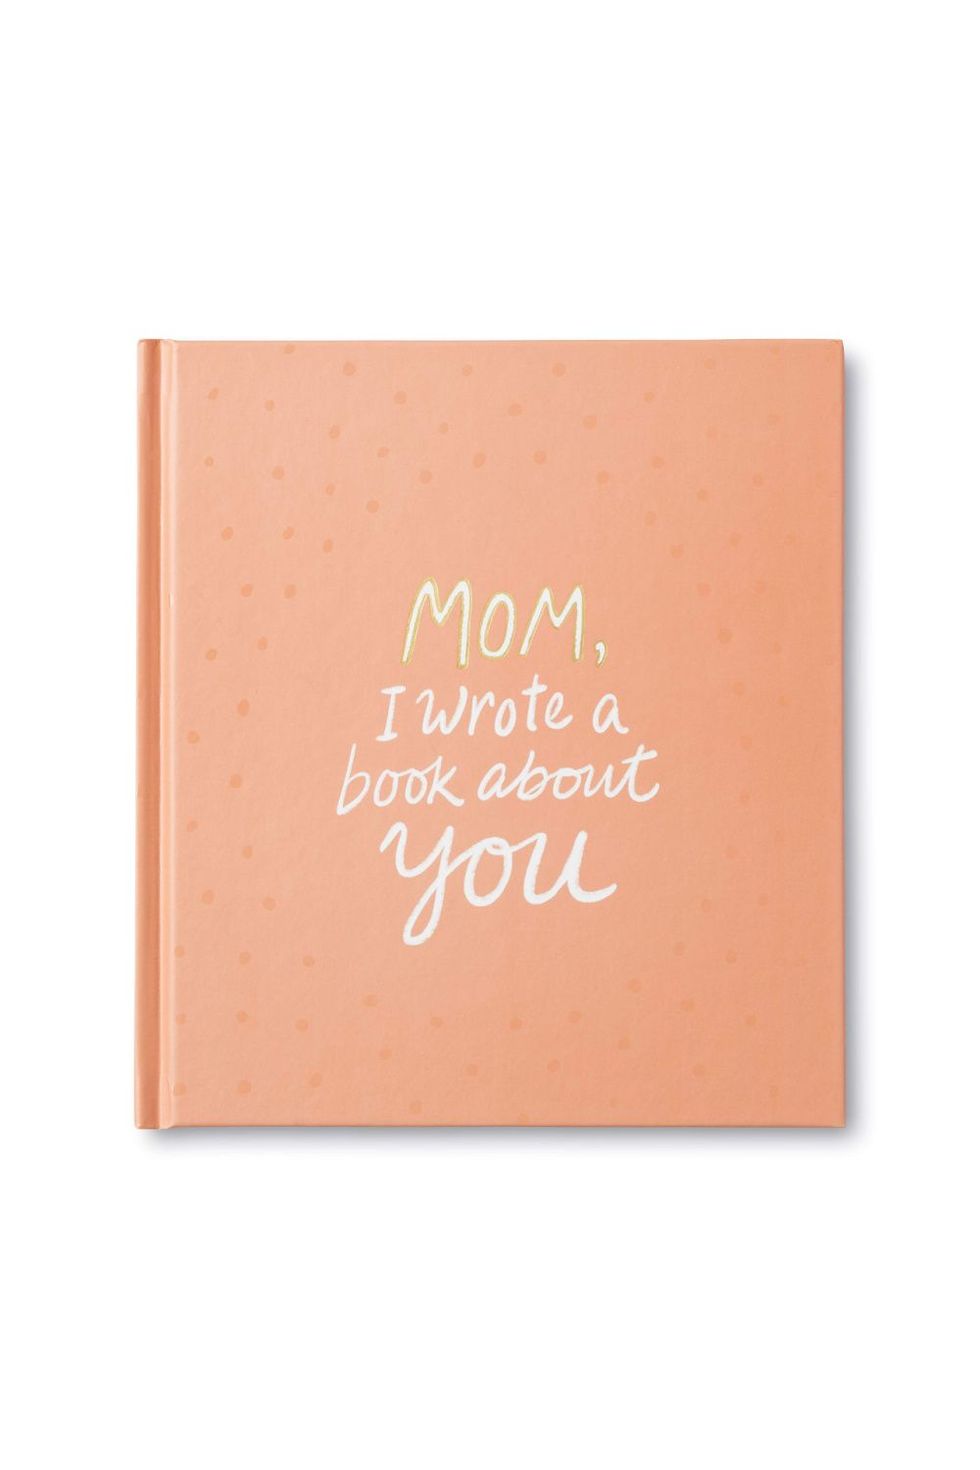 16 Mother's Day Gift Ideas  Last minute birthday gifts, Mom